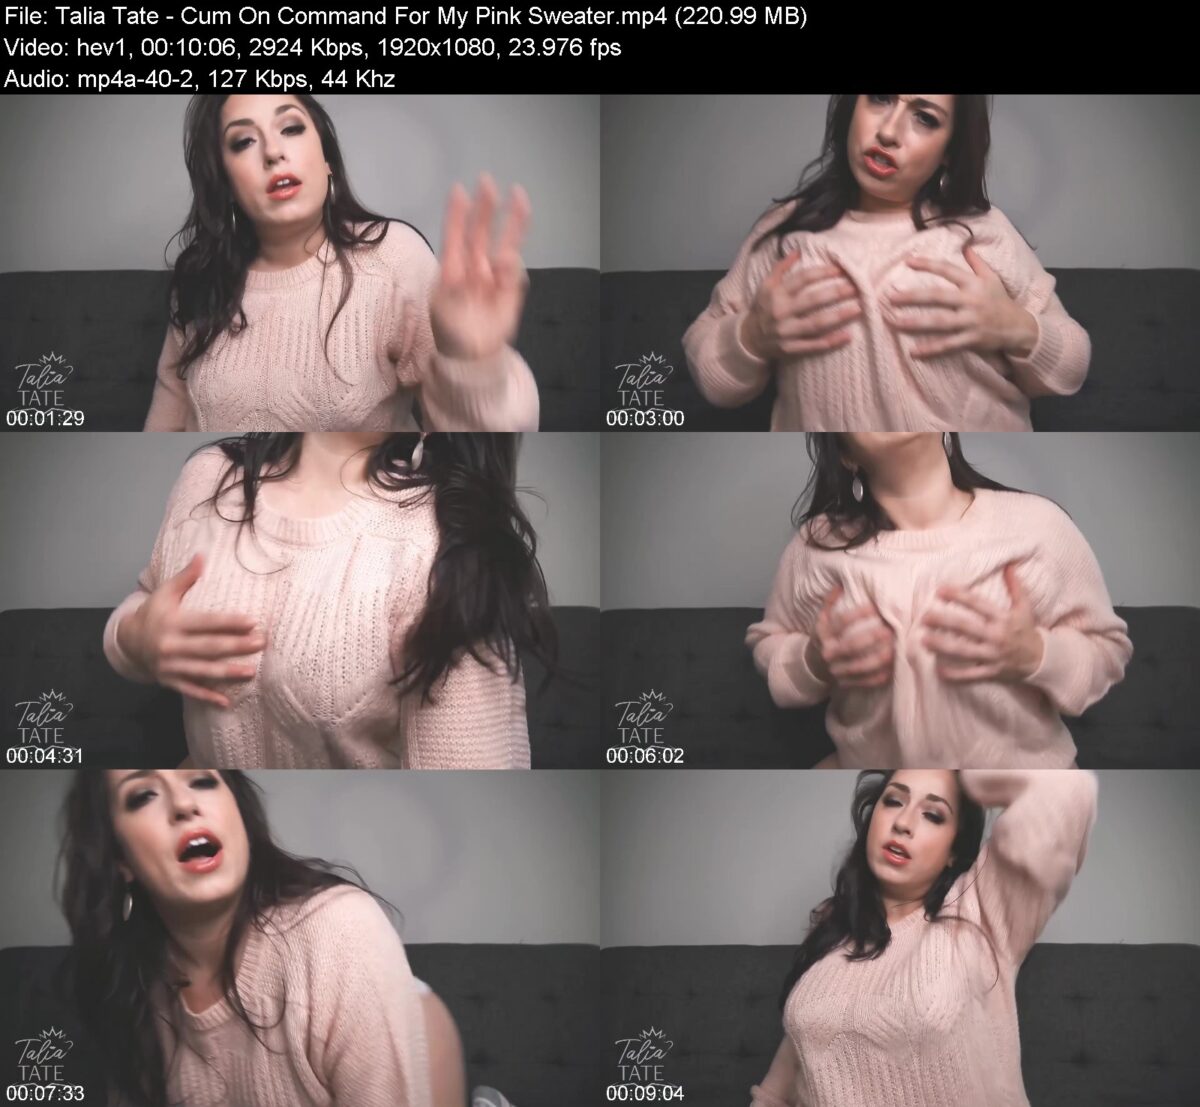 Actress: Talia Tate. Title and Studio: Cum On Command For My Pink Sweater